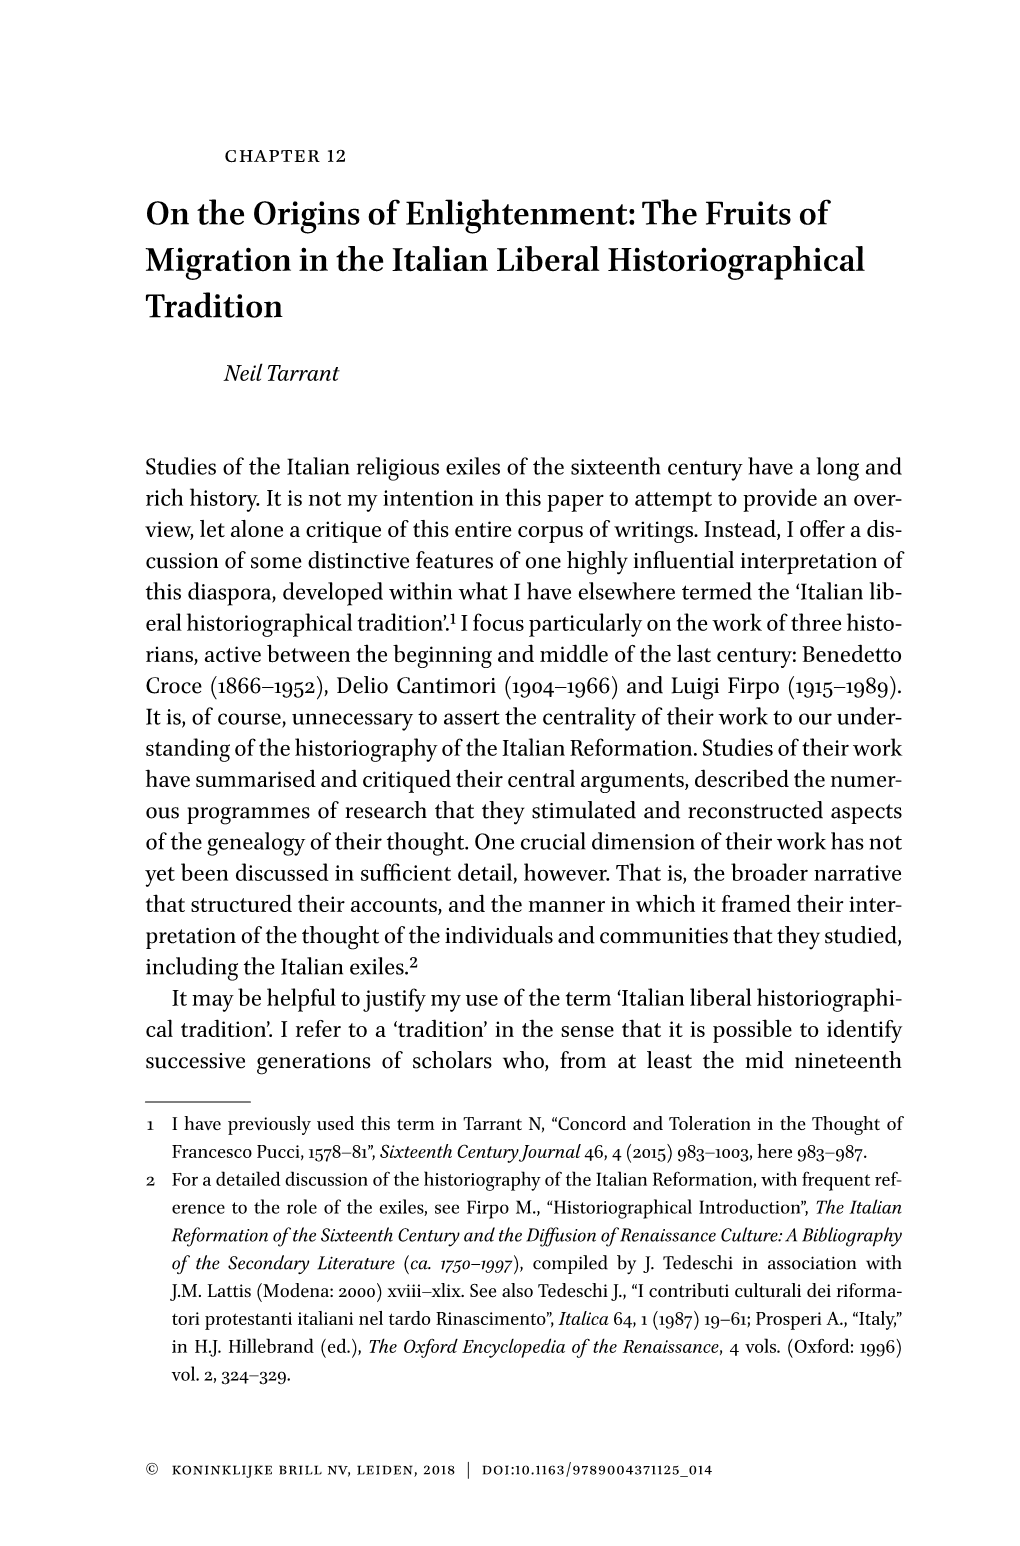 The Fruits of Migration in the Italian Liberal Historiographical Tradition